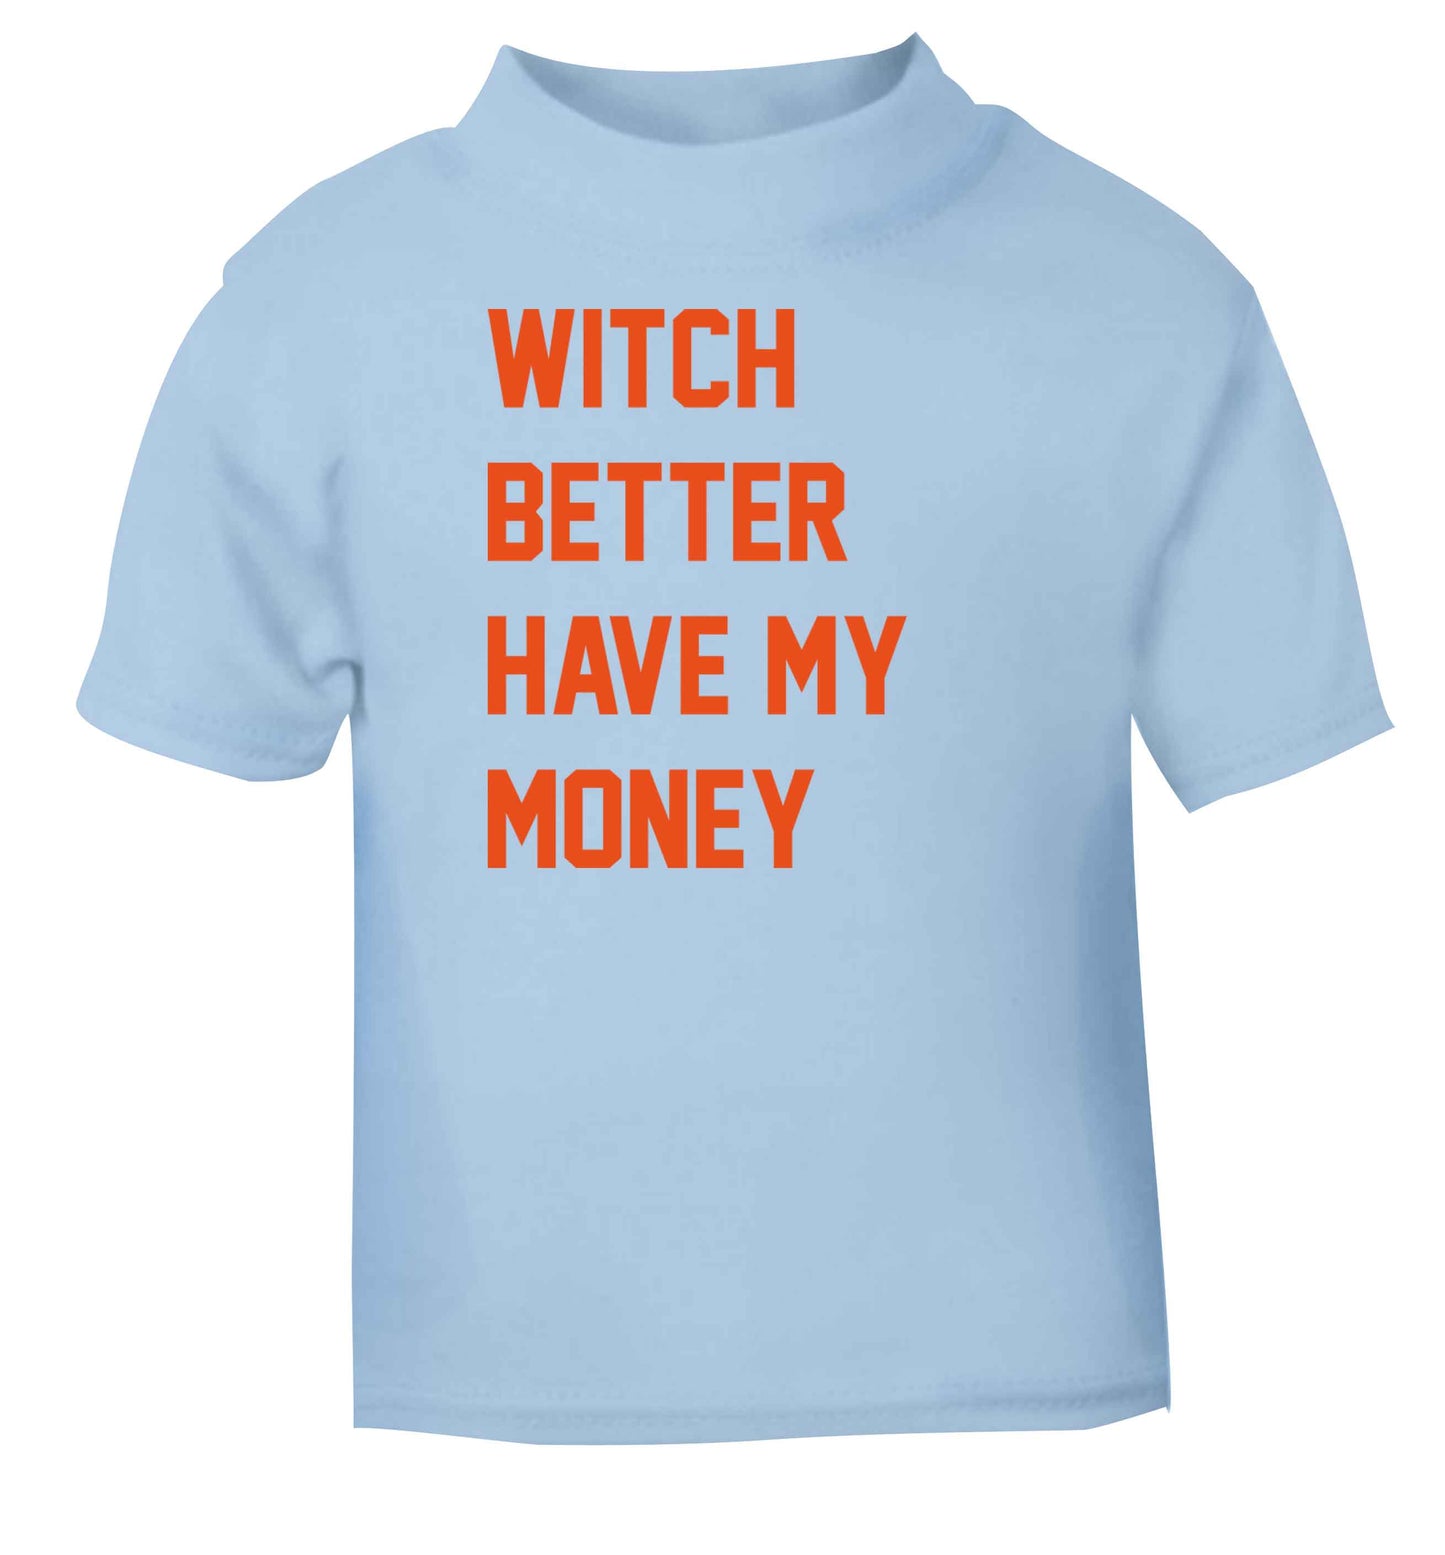 Witch better have my money light blue baby toddler Tshirt 2 Years